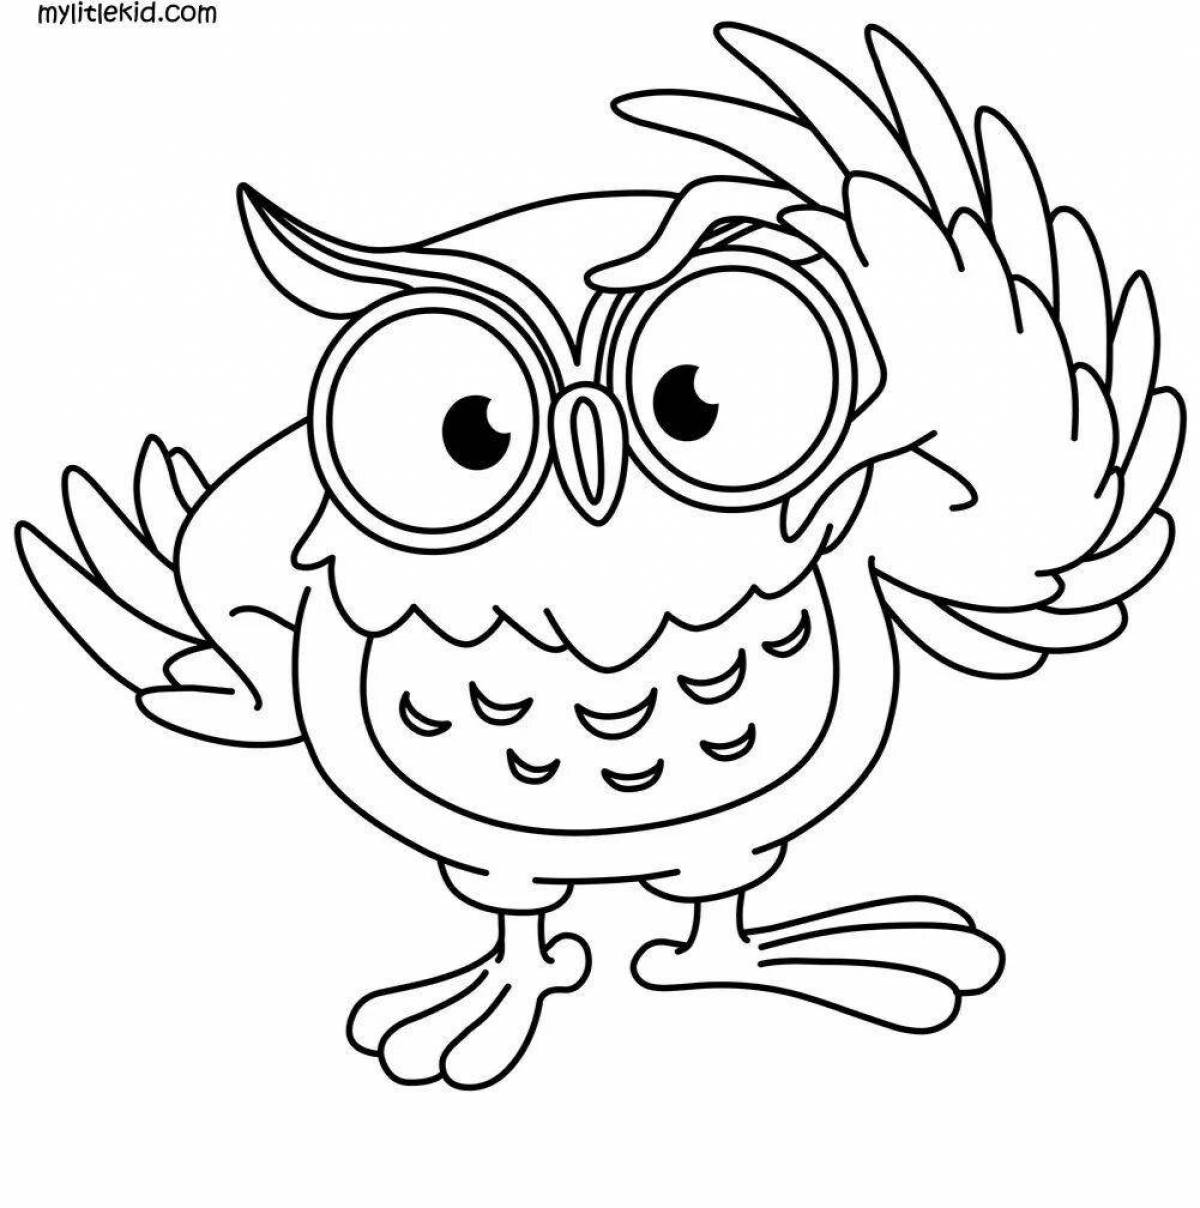 Dazzling wise owl coloring book for kids